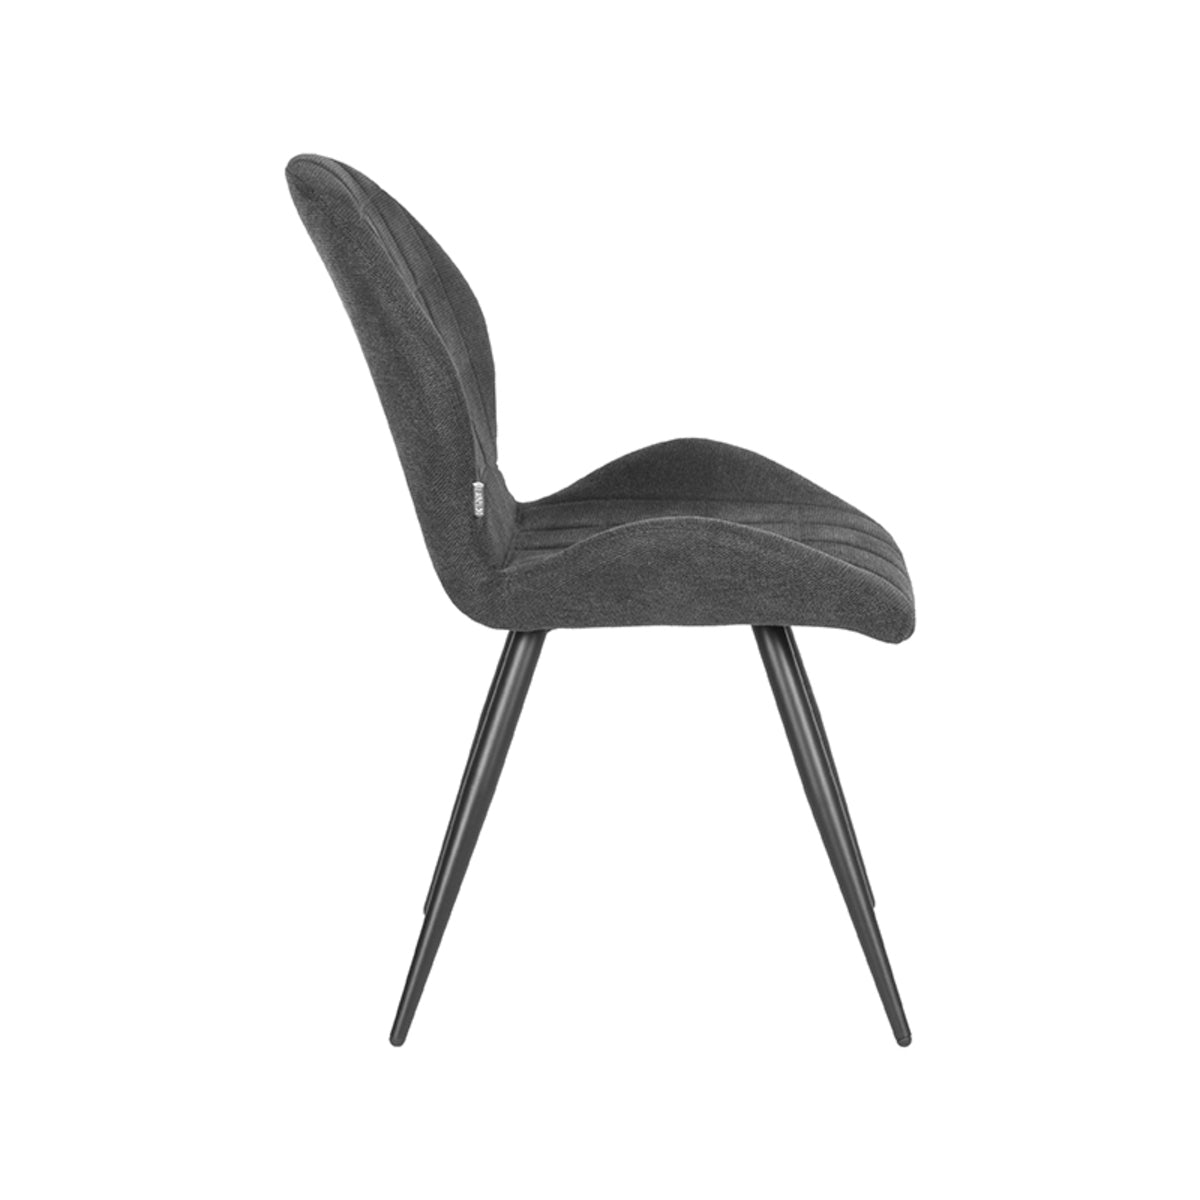 LABEL51 Dining room chair Sil - Anthracite - Weave | 2 pcs